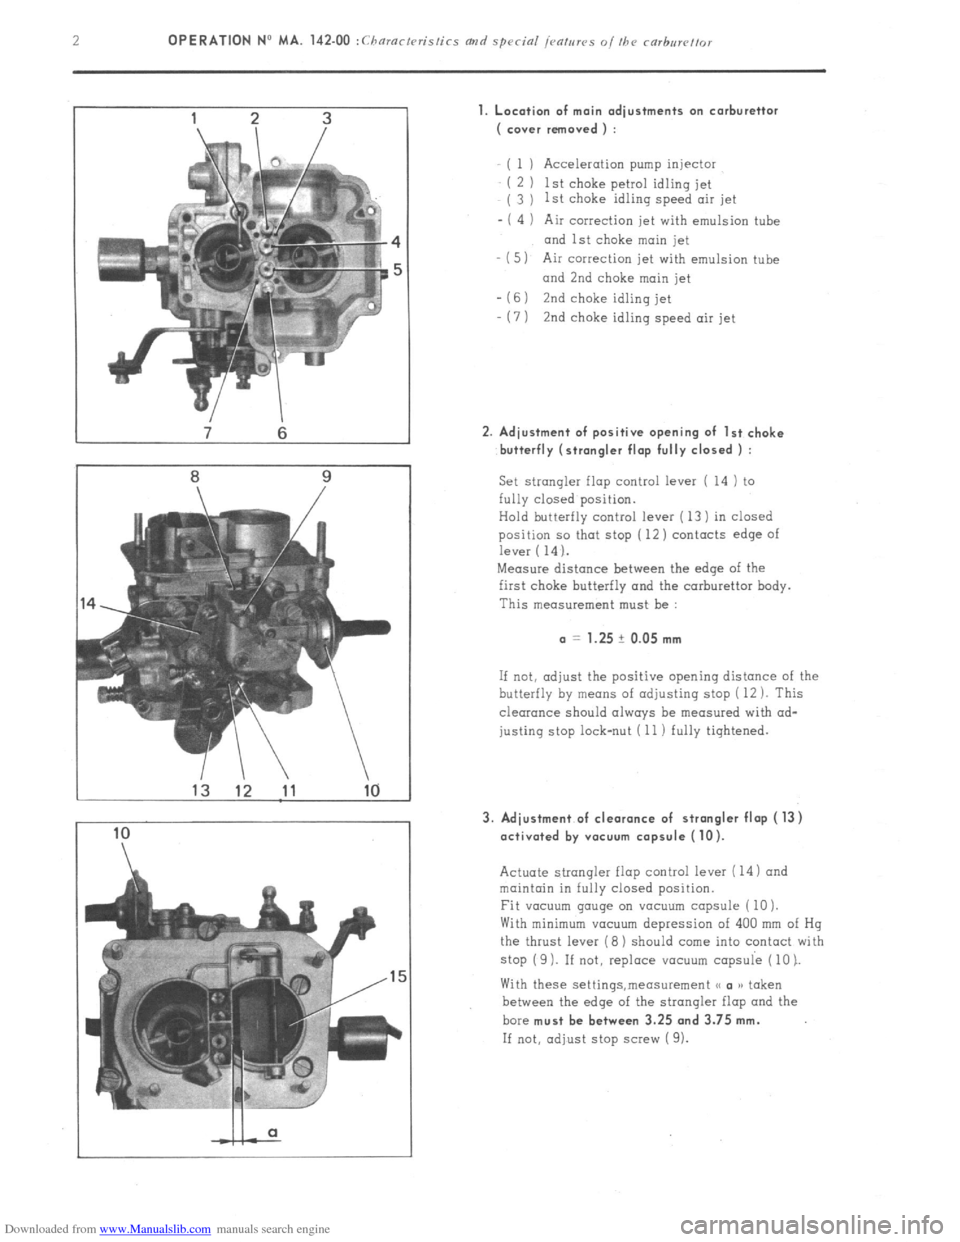 Citroen CX 1978 1.G Workshop Manual Downloaded from www.Manualslib.com manuals search engine 2 OPERATION No MA. 142-00 :Cbaracteris/ics and special j~,attlr~s o/the carhrrre~~or 
7 6 
8 9 
1 ) Acceleration pump injector 
2 ) 1st choke p